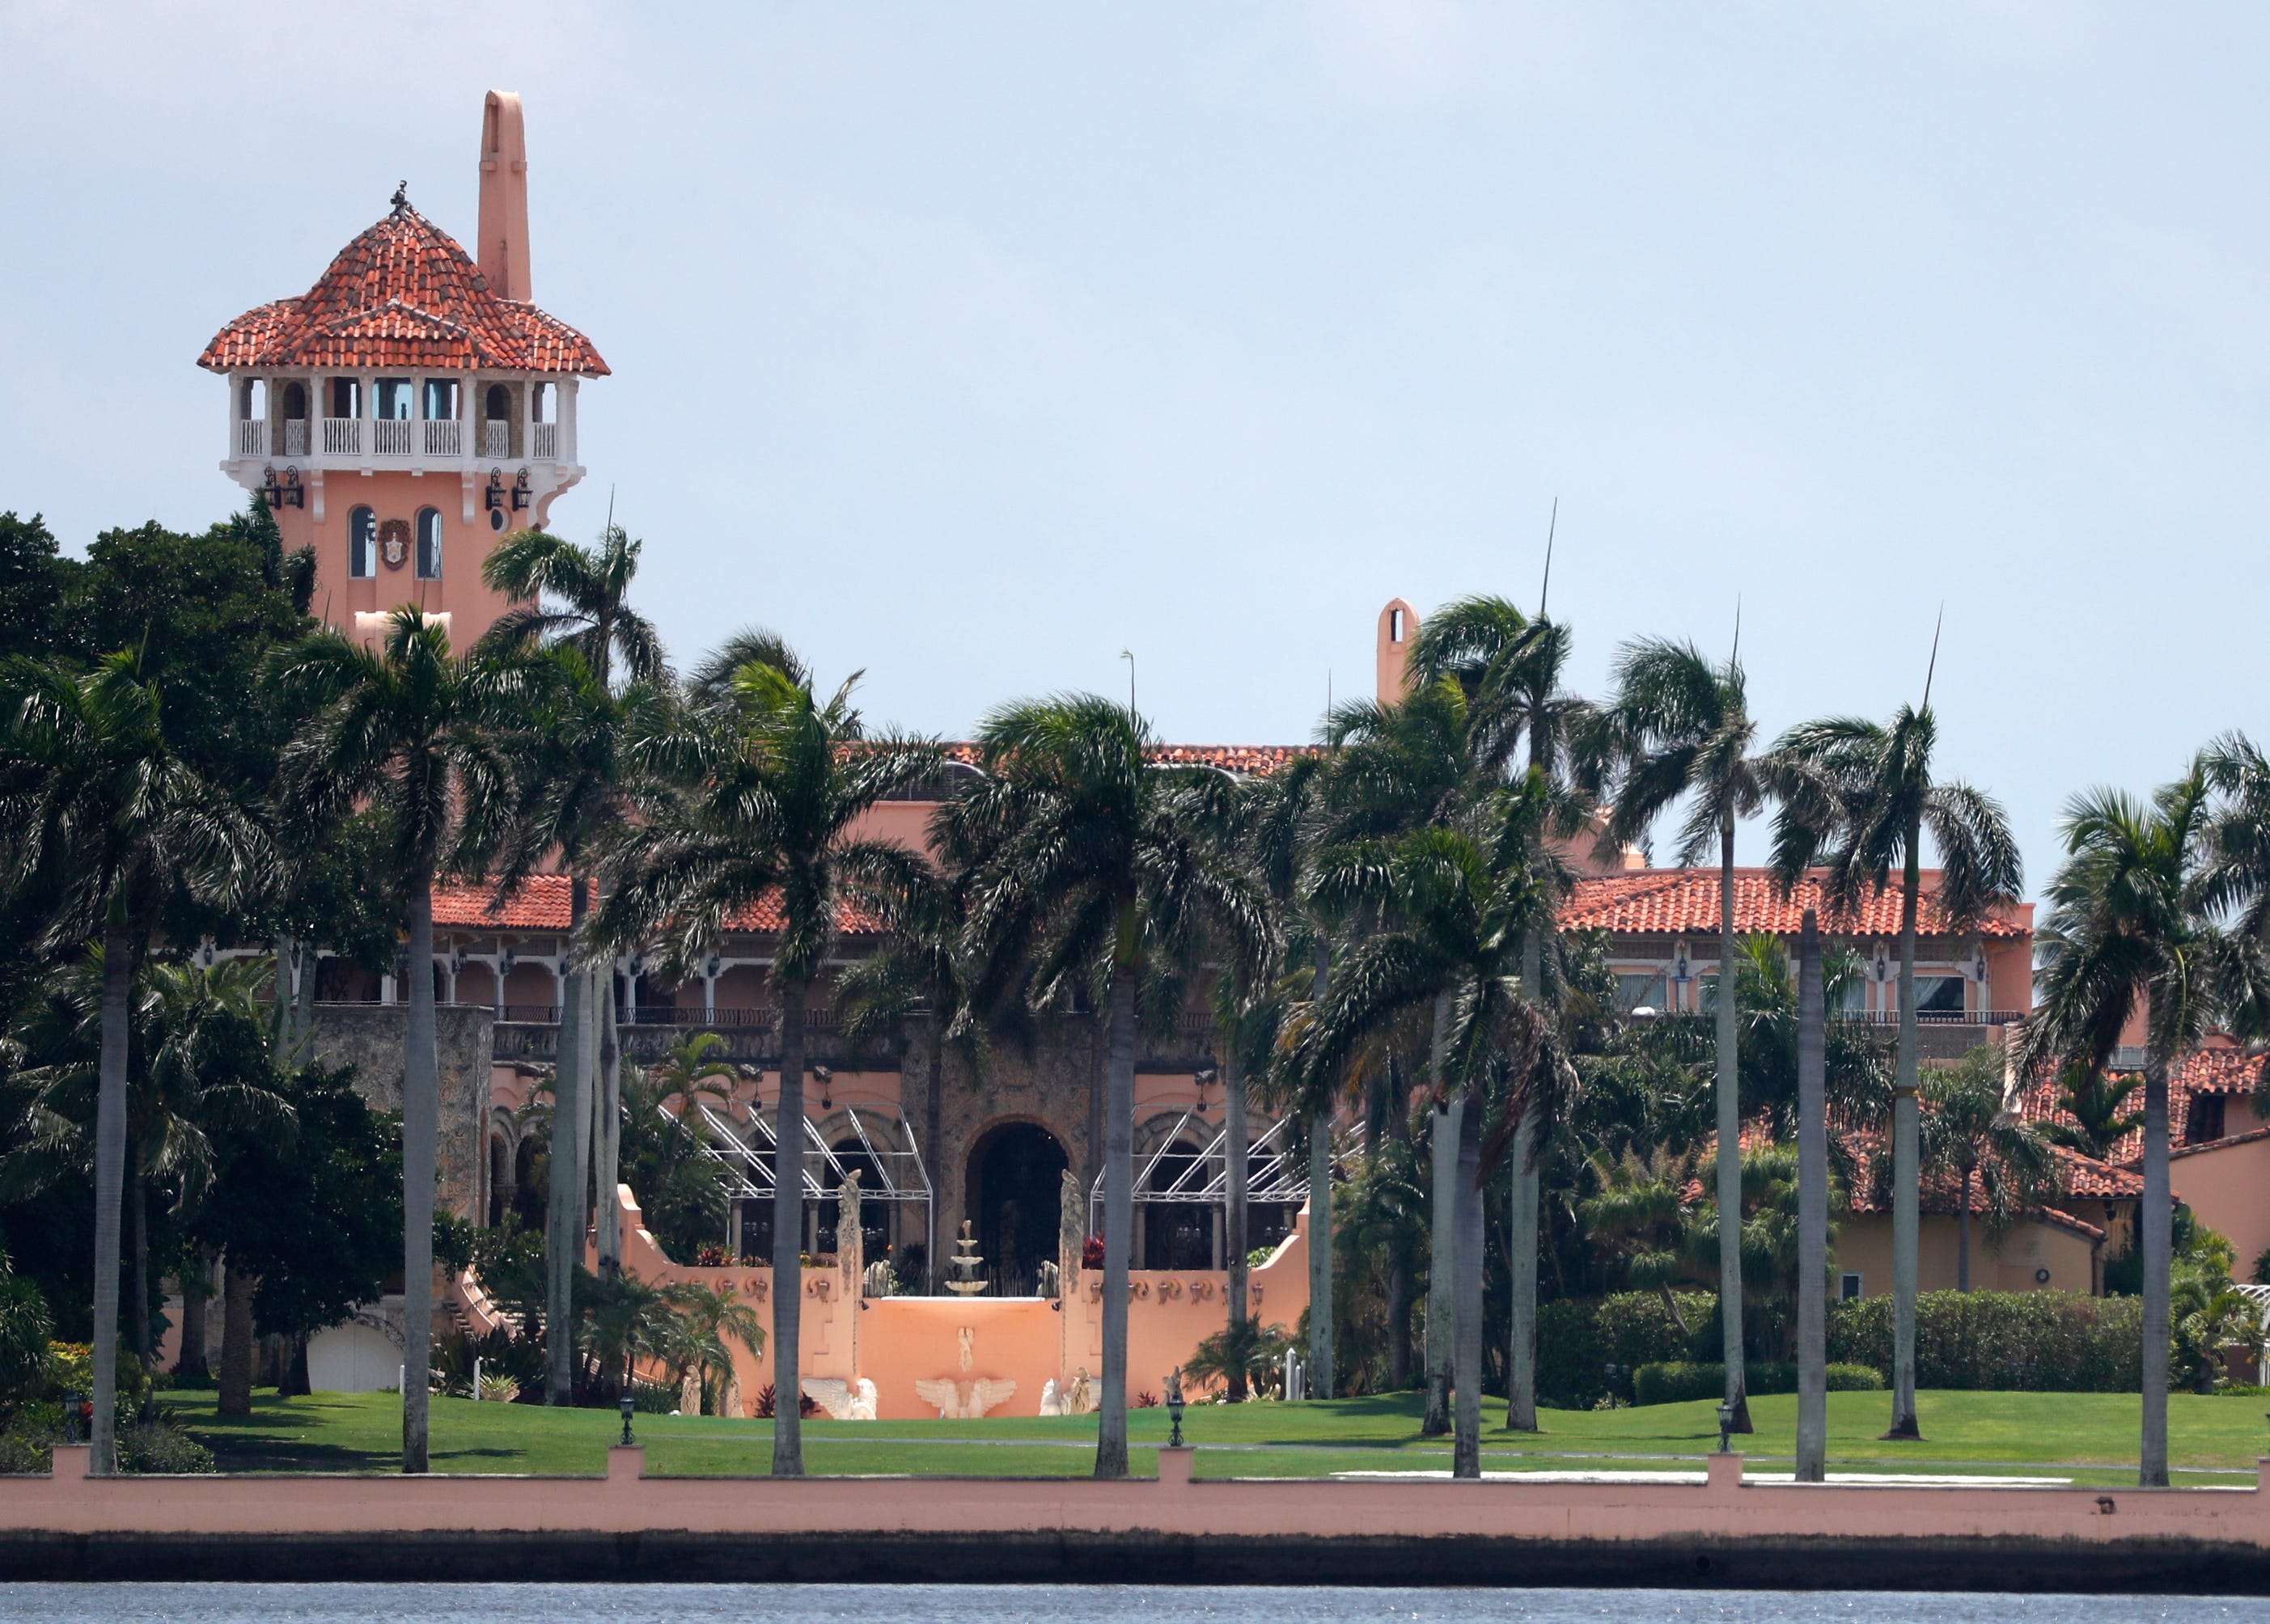 Trump's Mar-a-Lago estate: What to know about his Palm Beach home